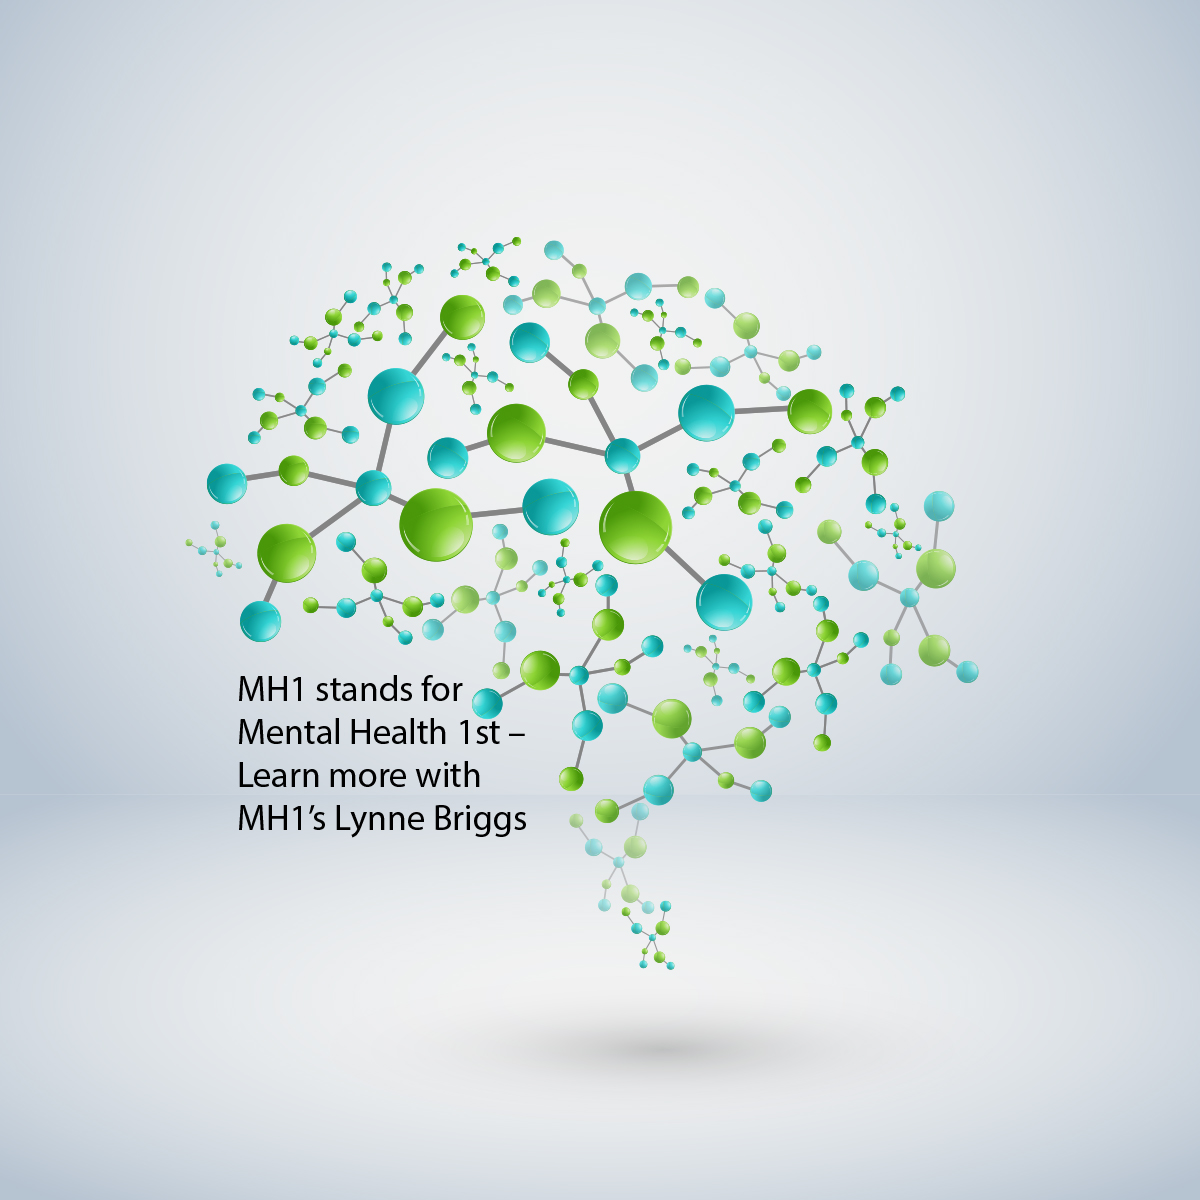 MH1 stands for Mental Health 1st – Learn more with MH1’s Lynne Briggs